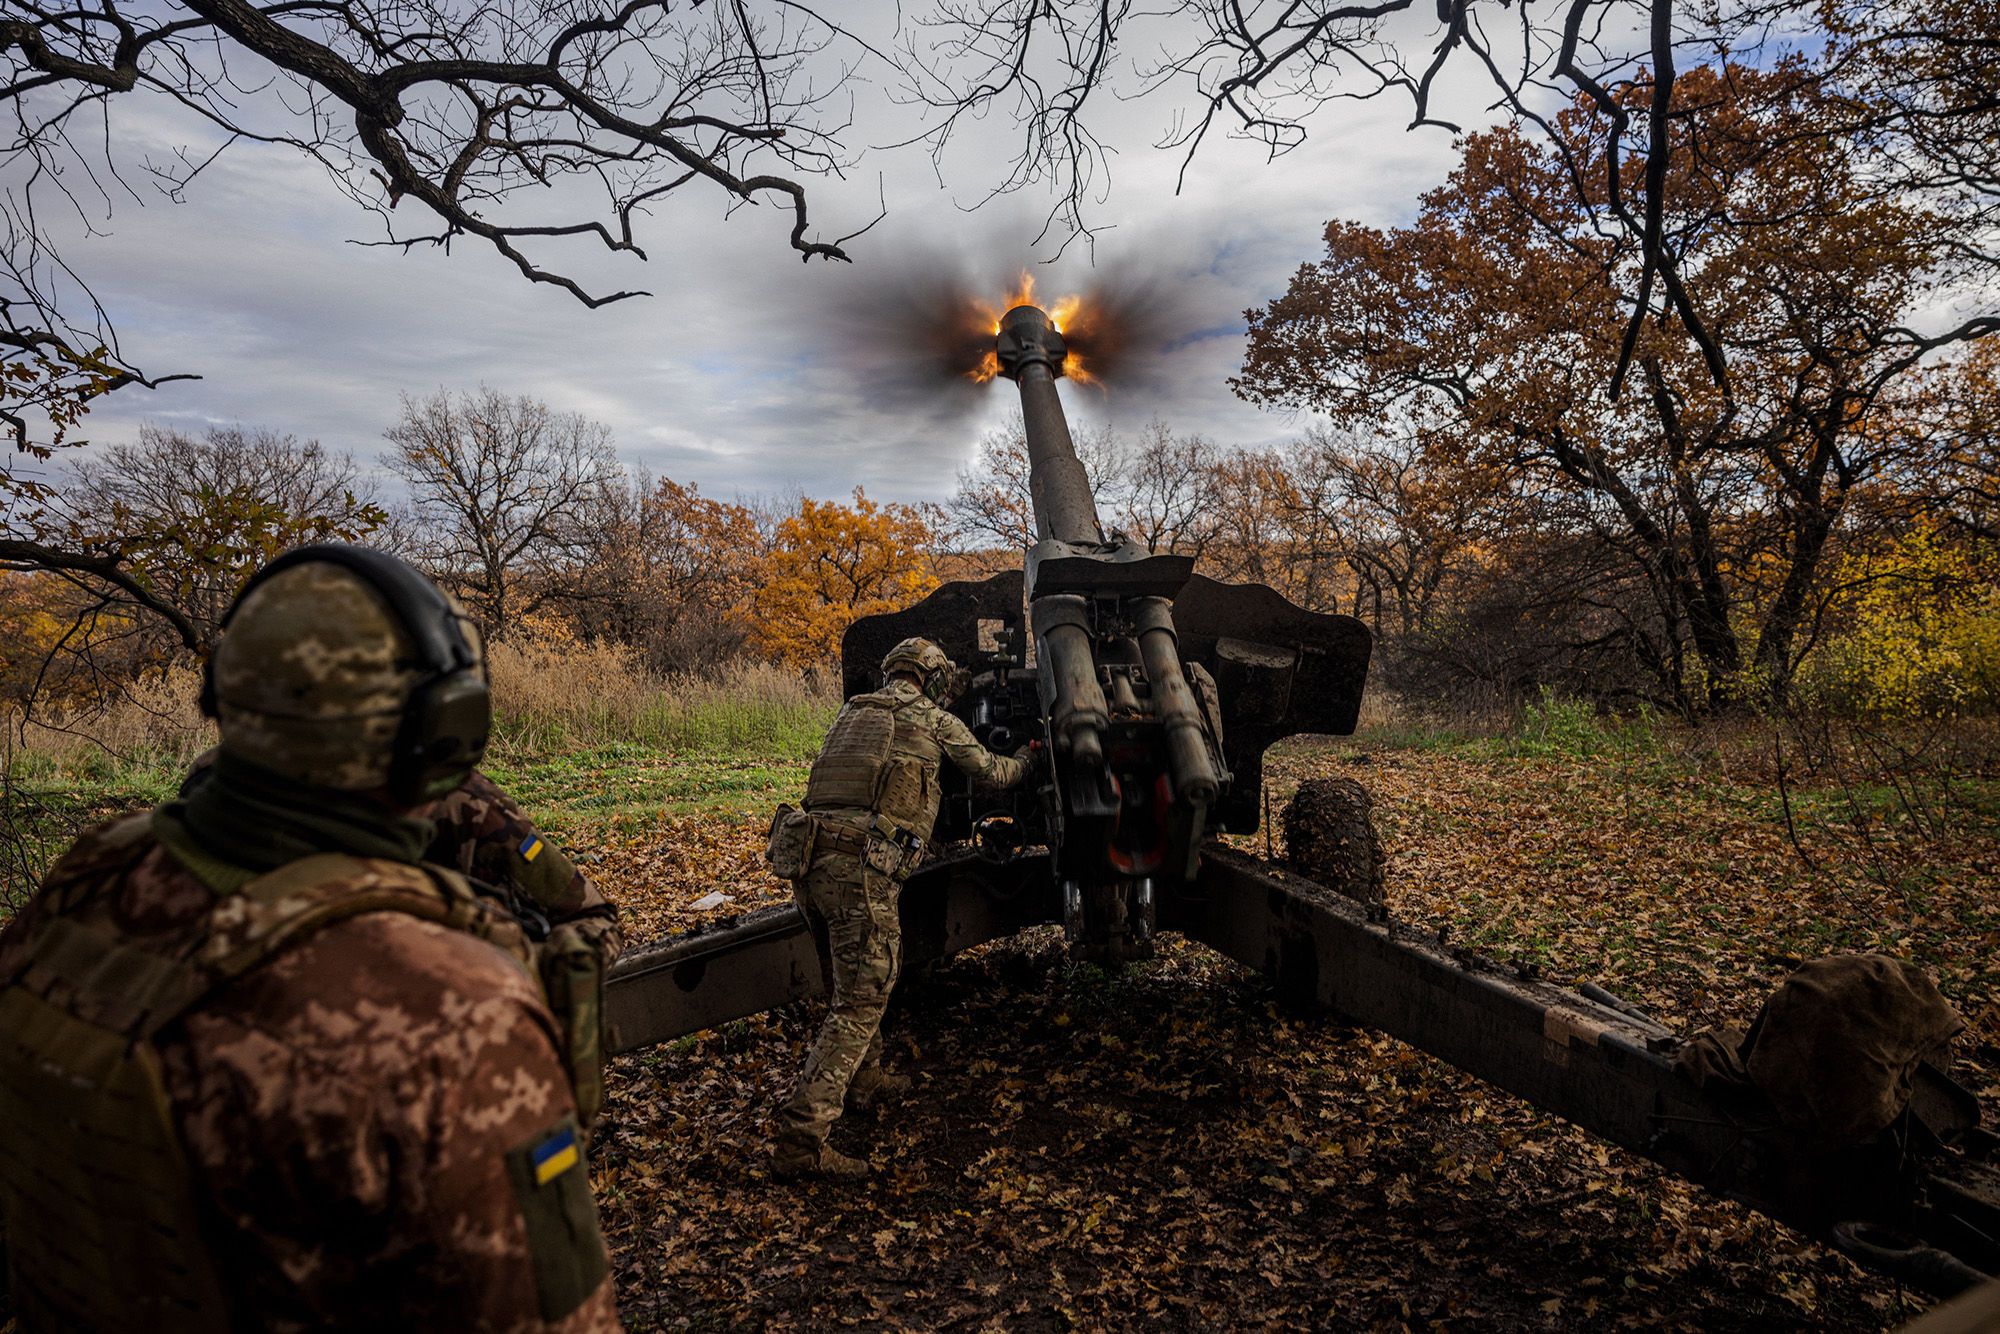 How many artillery shells has Russia fired in Ukraine? - Quora